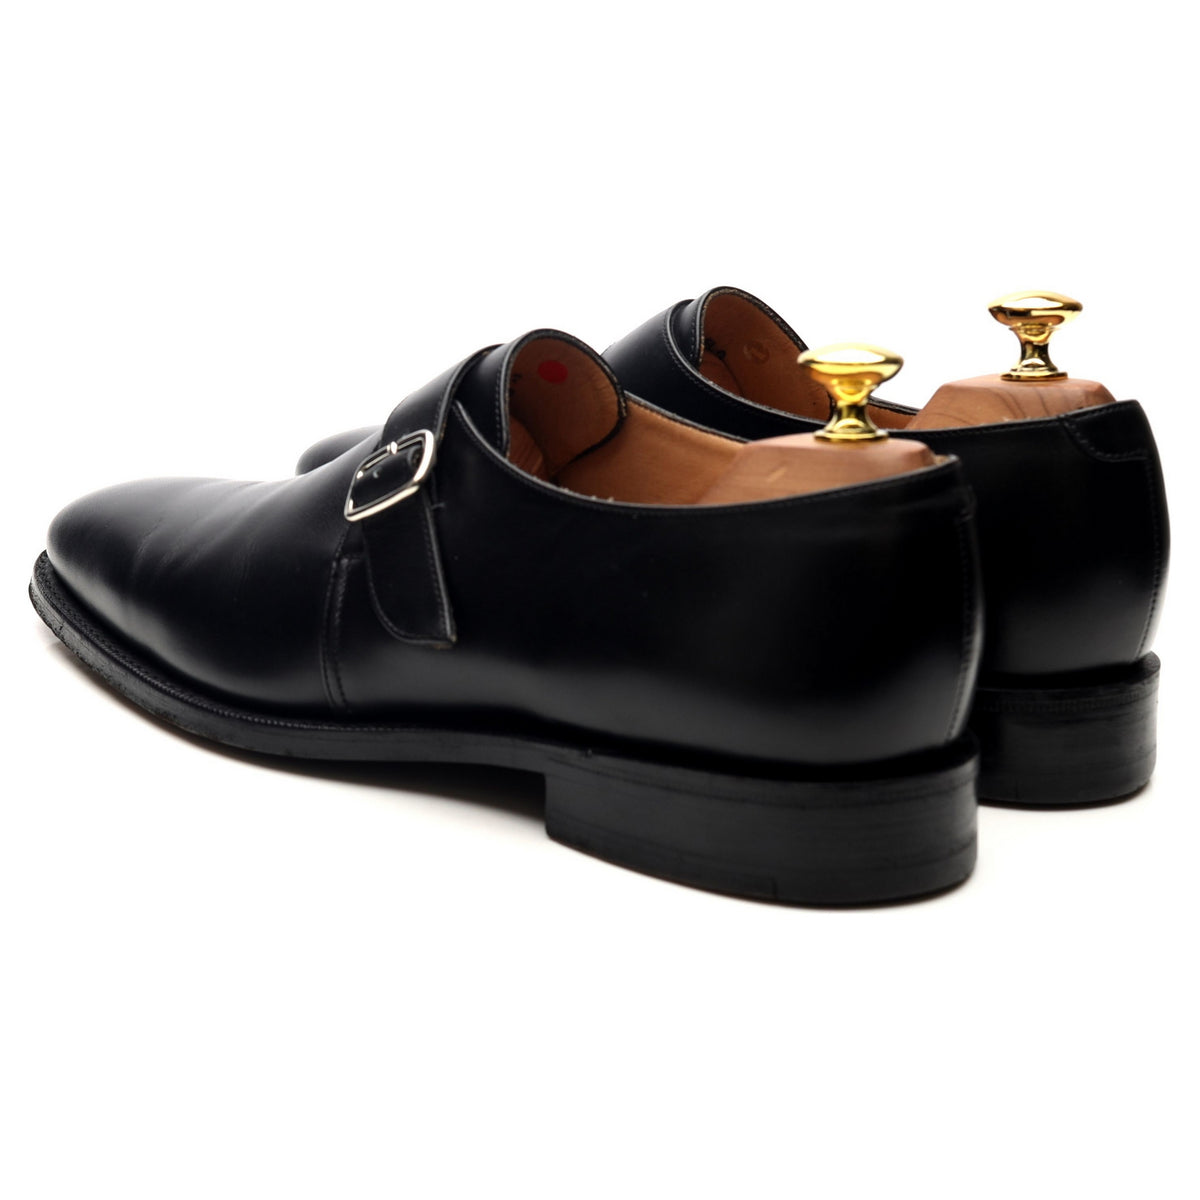 Royal Collection Black Leather Monk Strap UK 8.5 F